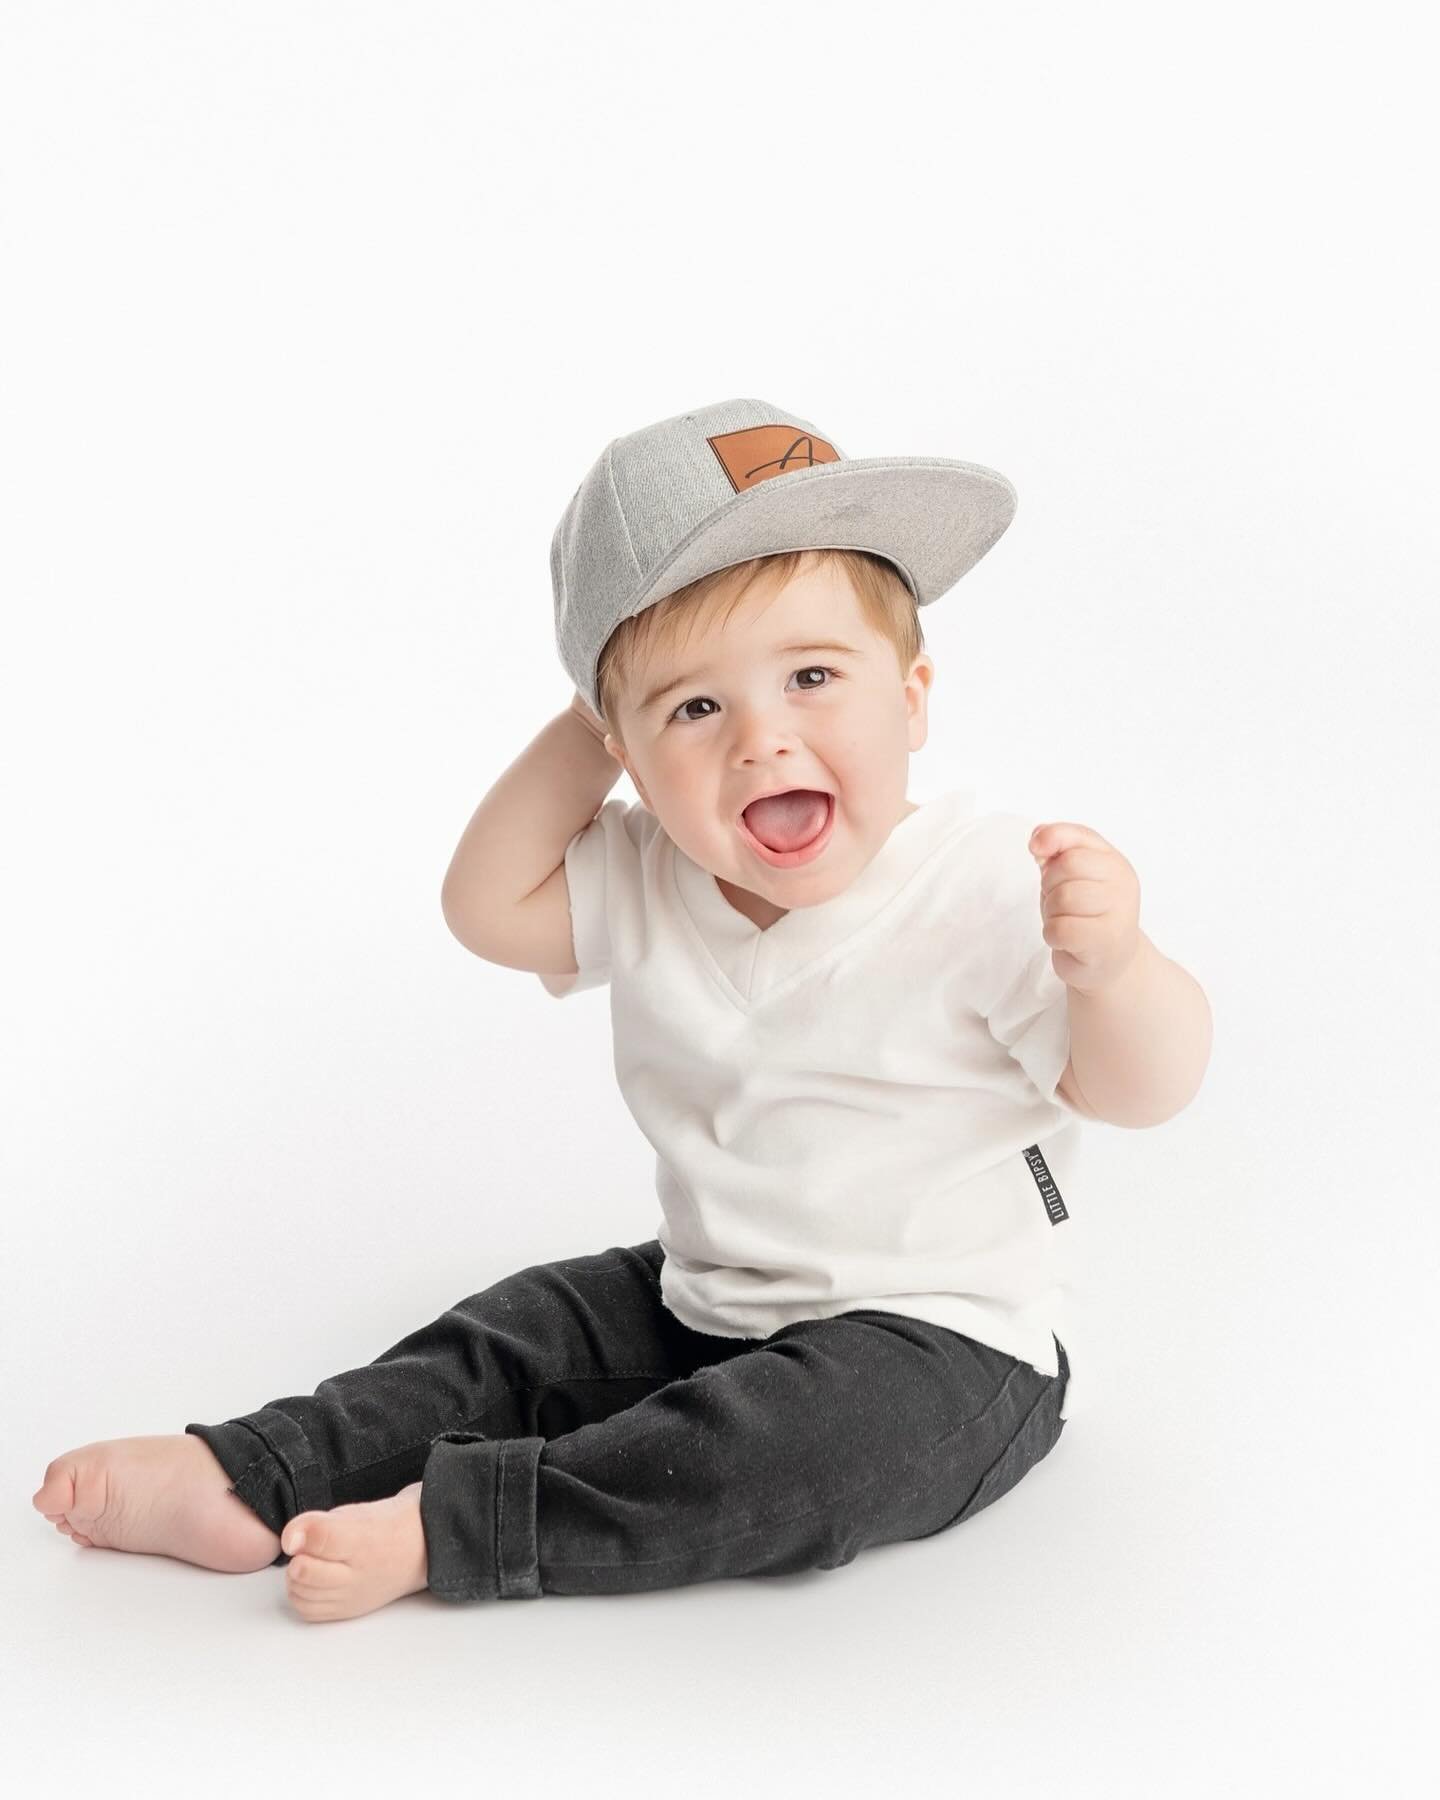 This little one was all smiles for his first birthday session.  I love this hat that has his name on it too!! First birthday sessions include multiple setups so you have all the memories of your little one!

#firstbirthday #columbusohiobabyphotograph